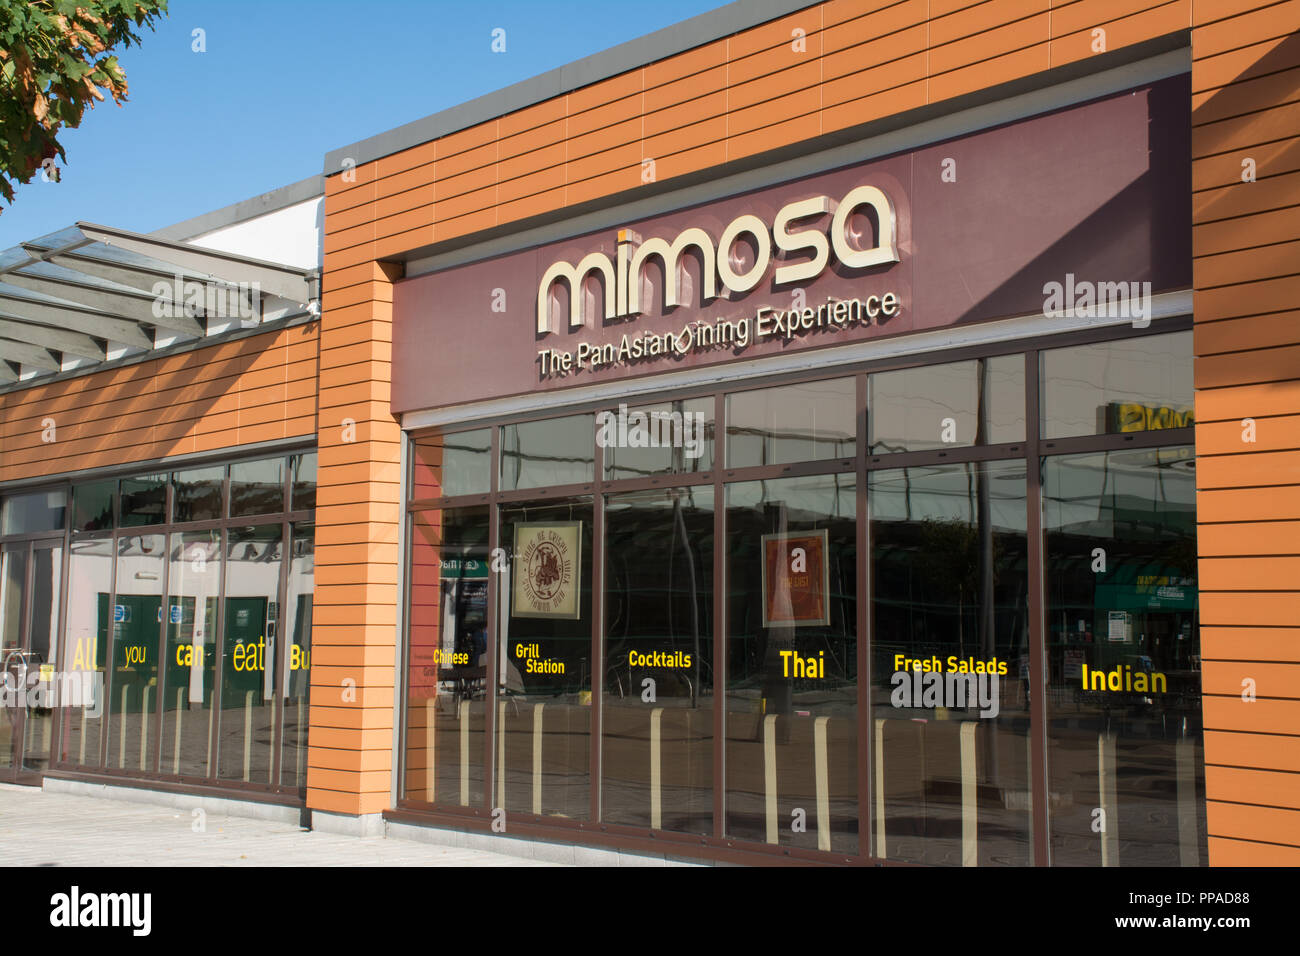 Mimosa Restaurant specializing in Pan Asian and World Buffet, UK Stock Photo